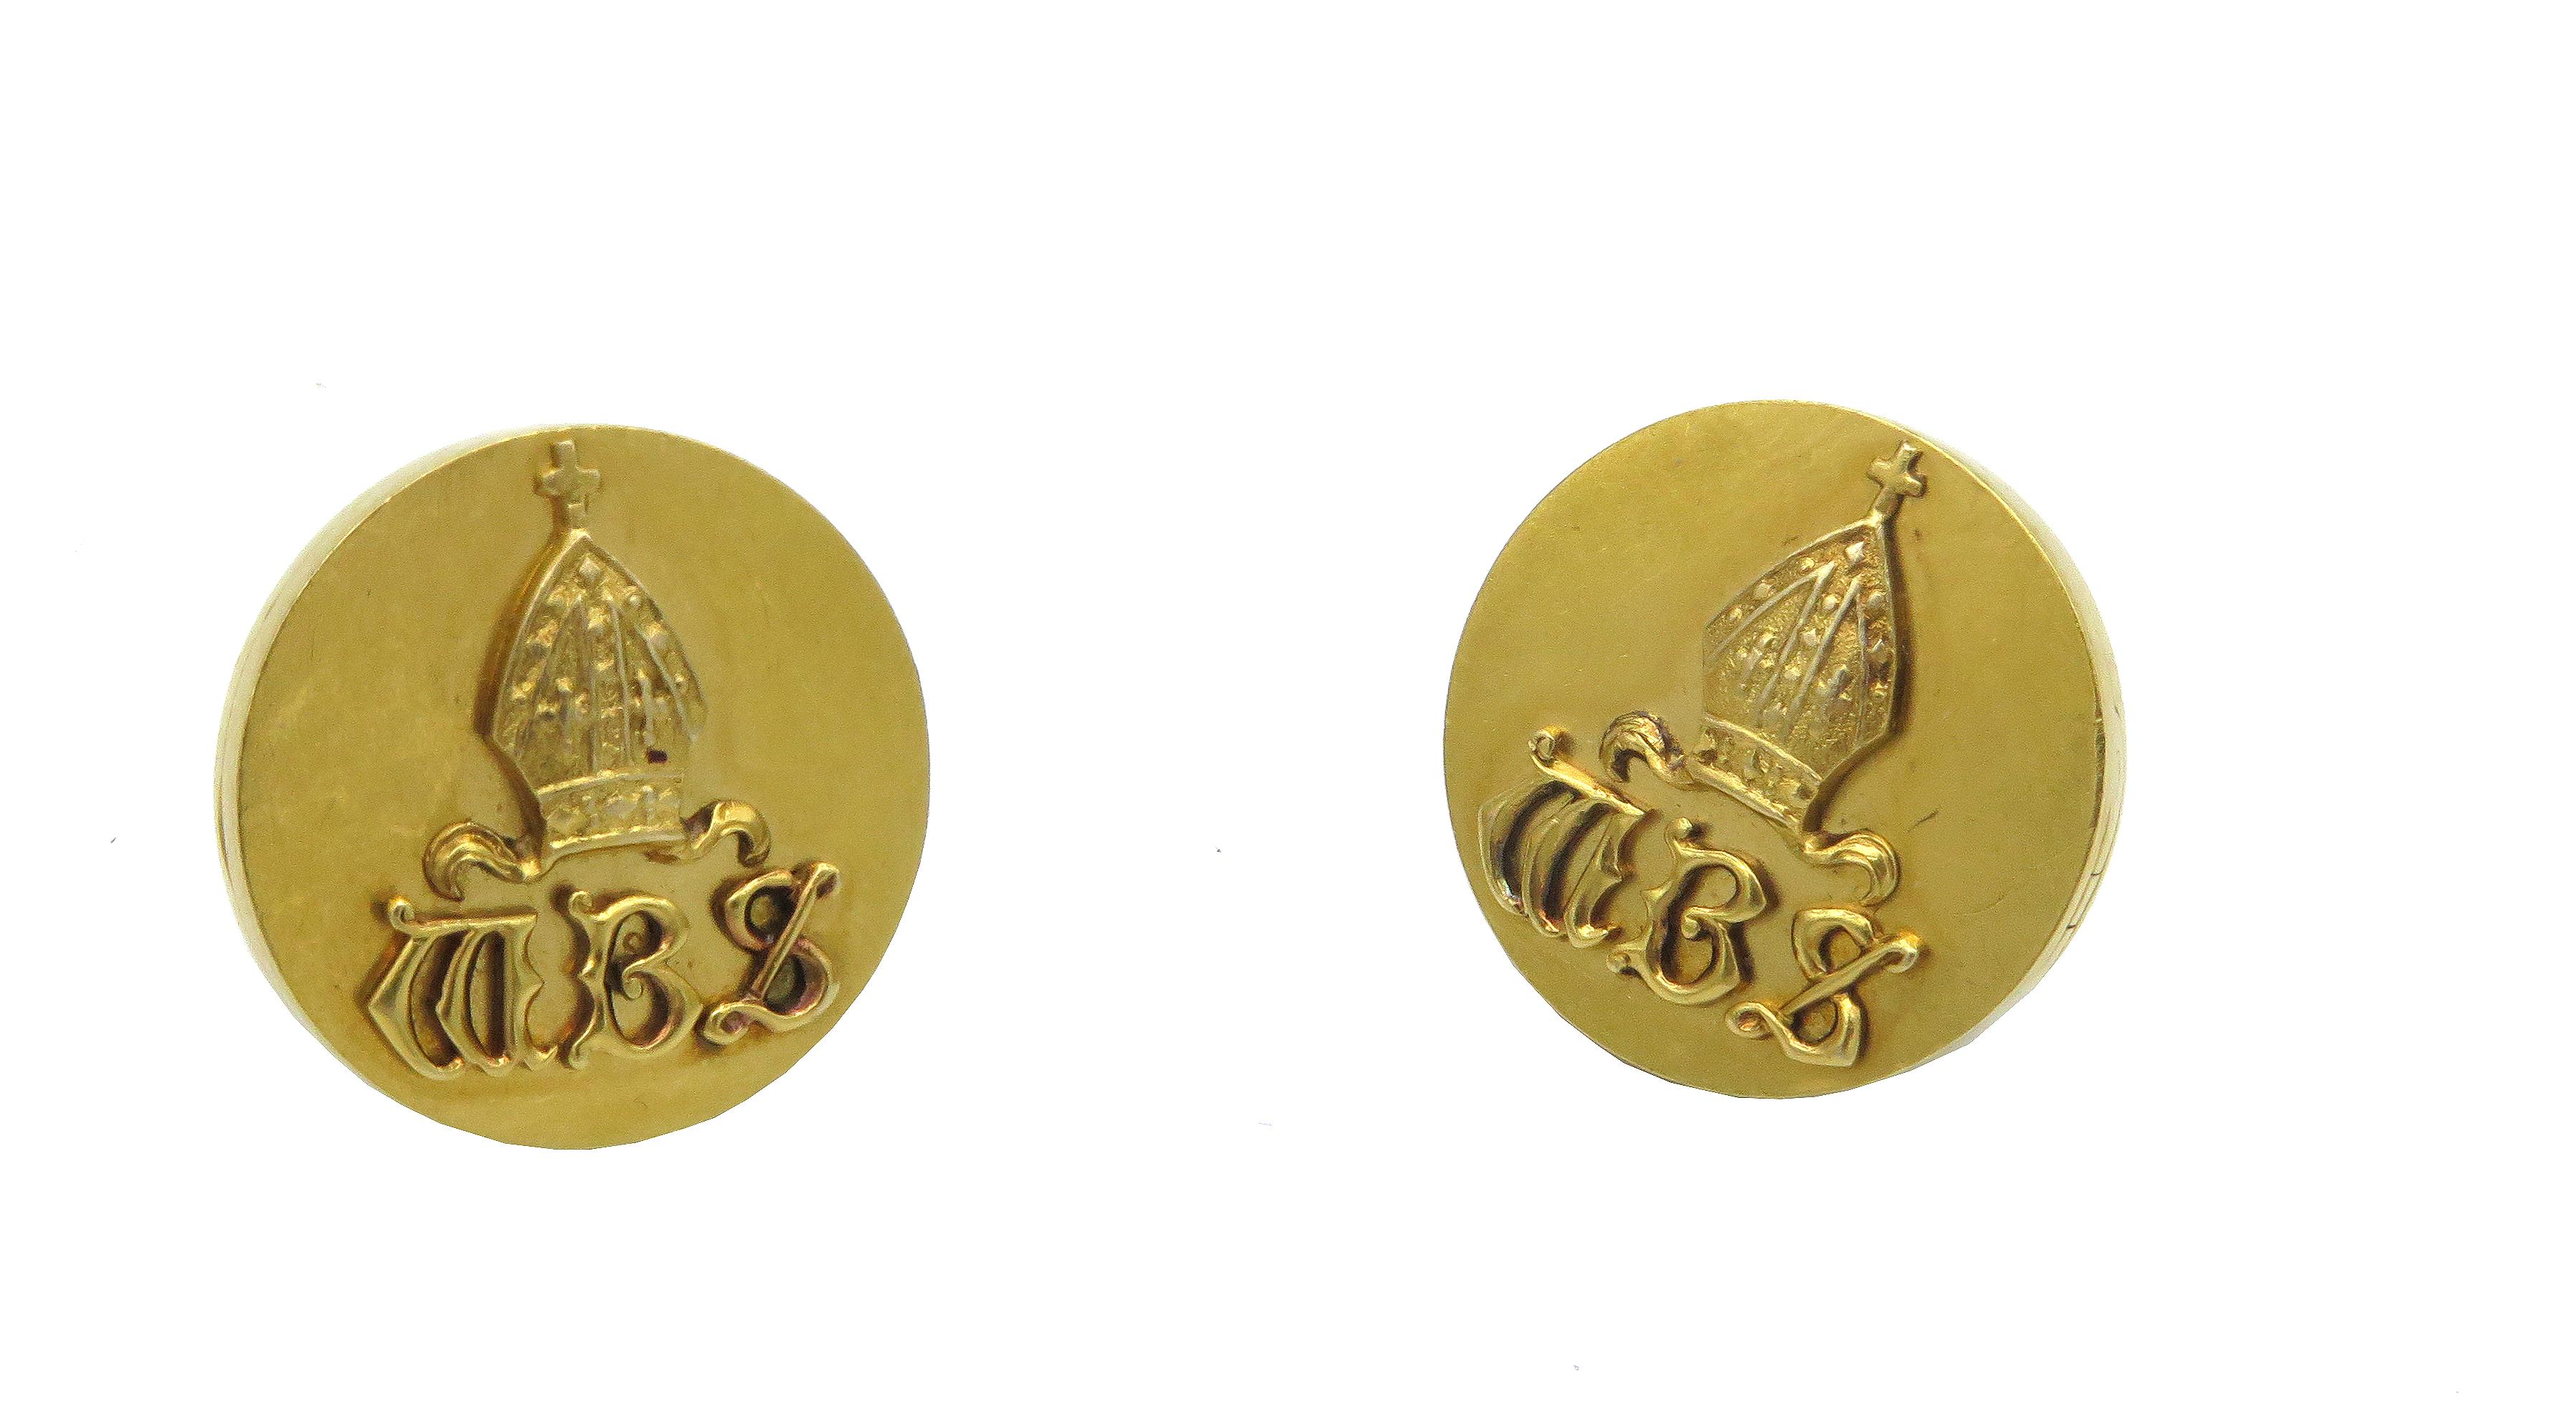 Bishop Themed Cufflinks, latergical style. 19th century, bishops cufflinks with engraving 